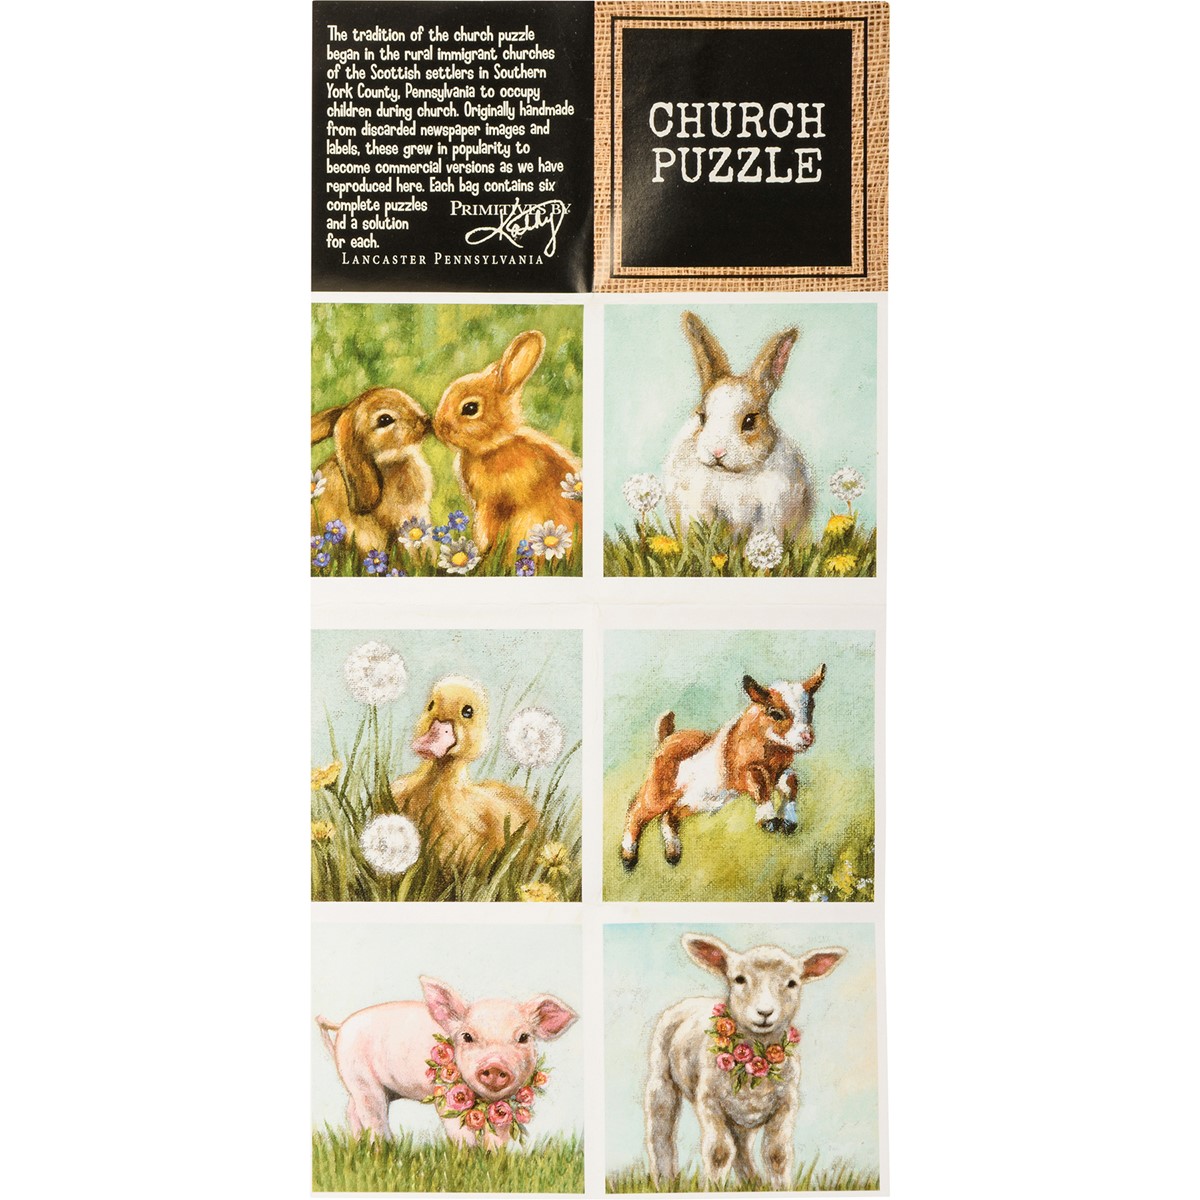 Young Farm Friends Church Puzzle - Wood, Paper, Fabric, Metal, Ribbon